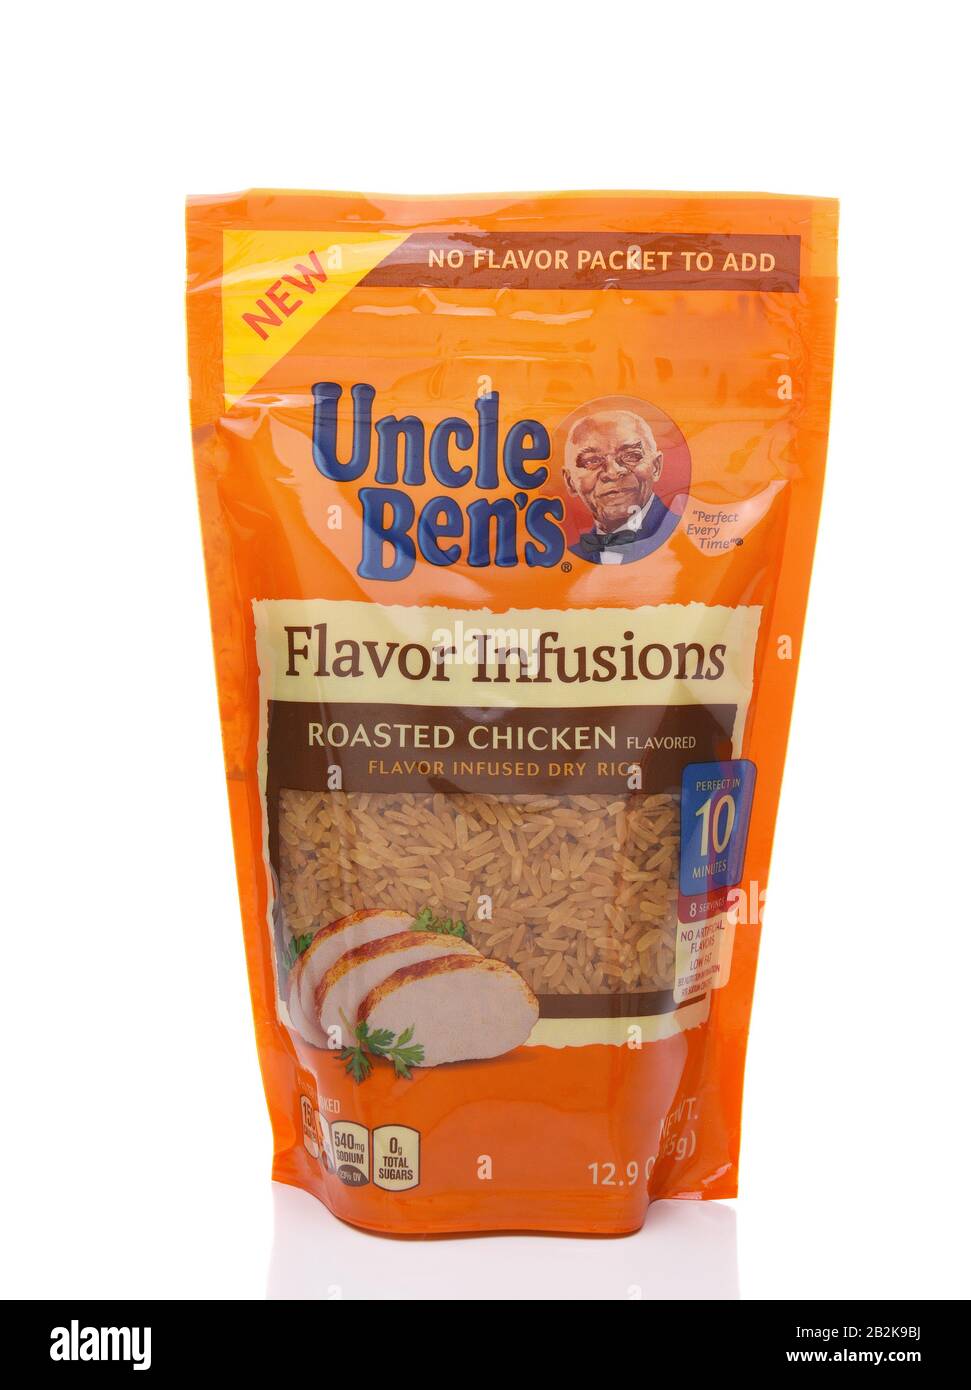 IRVINE, CA - NOVEMBER 8, 2017:  Uncle Bens Flavor Infusions Roasted Chicken Rice. The brand was introduced by Converted Rice Inc., which was later bou Stock Photo